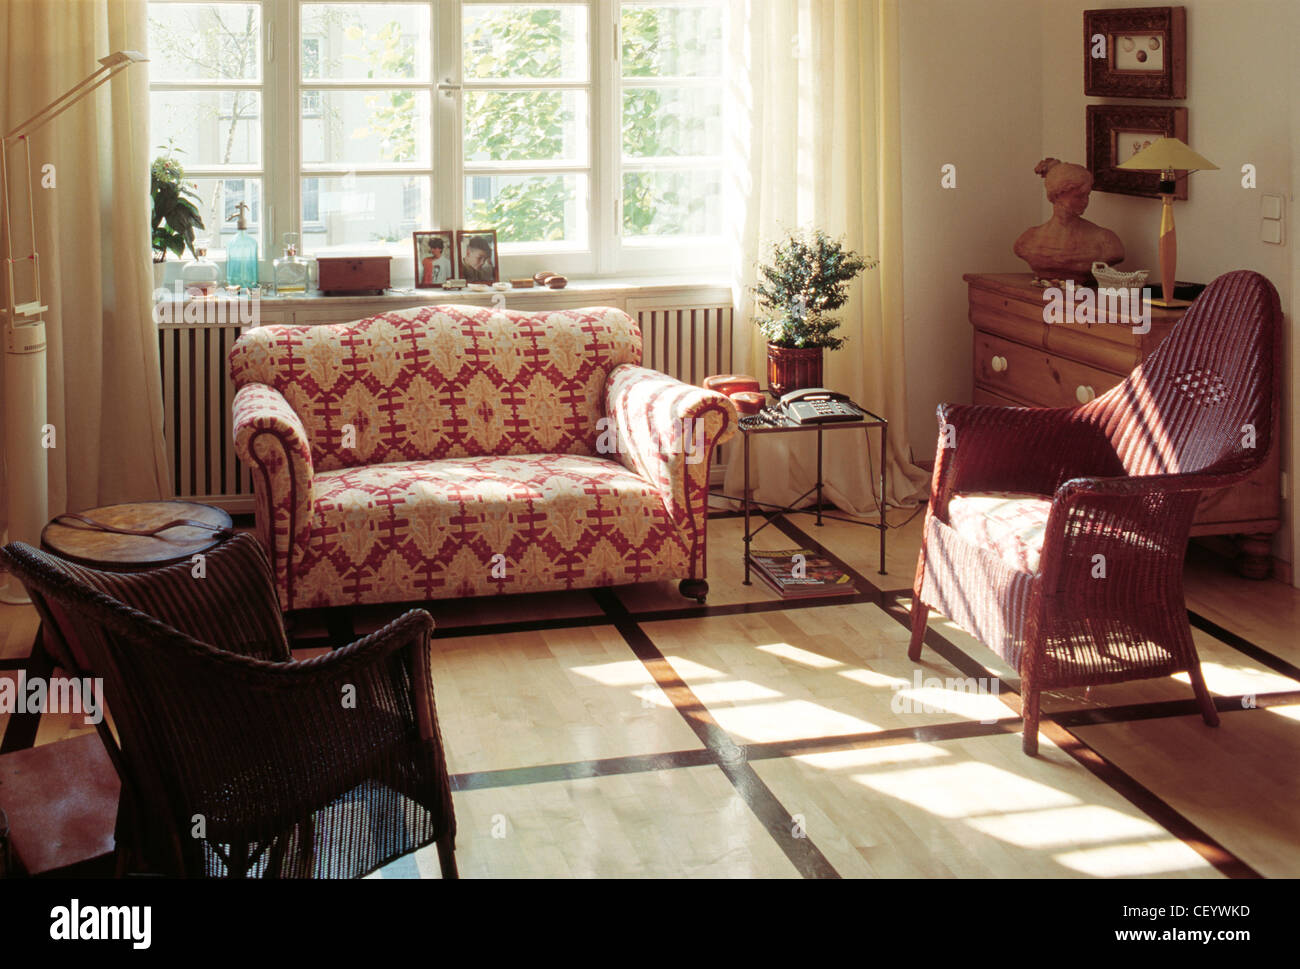 REAL HOMESLiving area two seater patterned armchair, two wicker chairs, window cream curtains, laminate floor, wood chest of Stock Photo